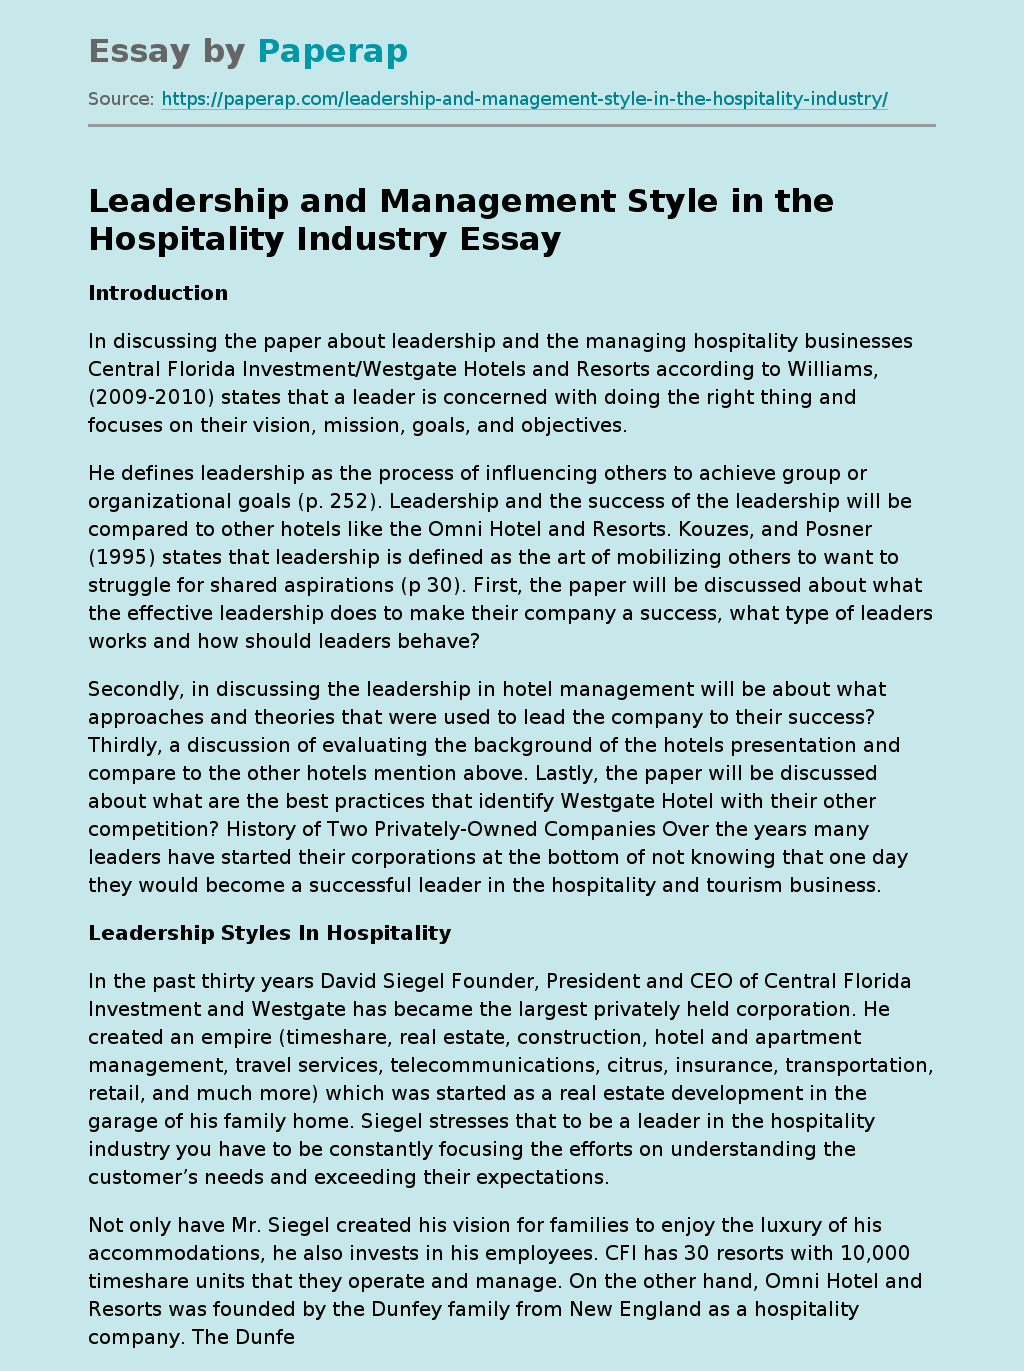 Leadership and Management Style in the Hospitality Industry